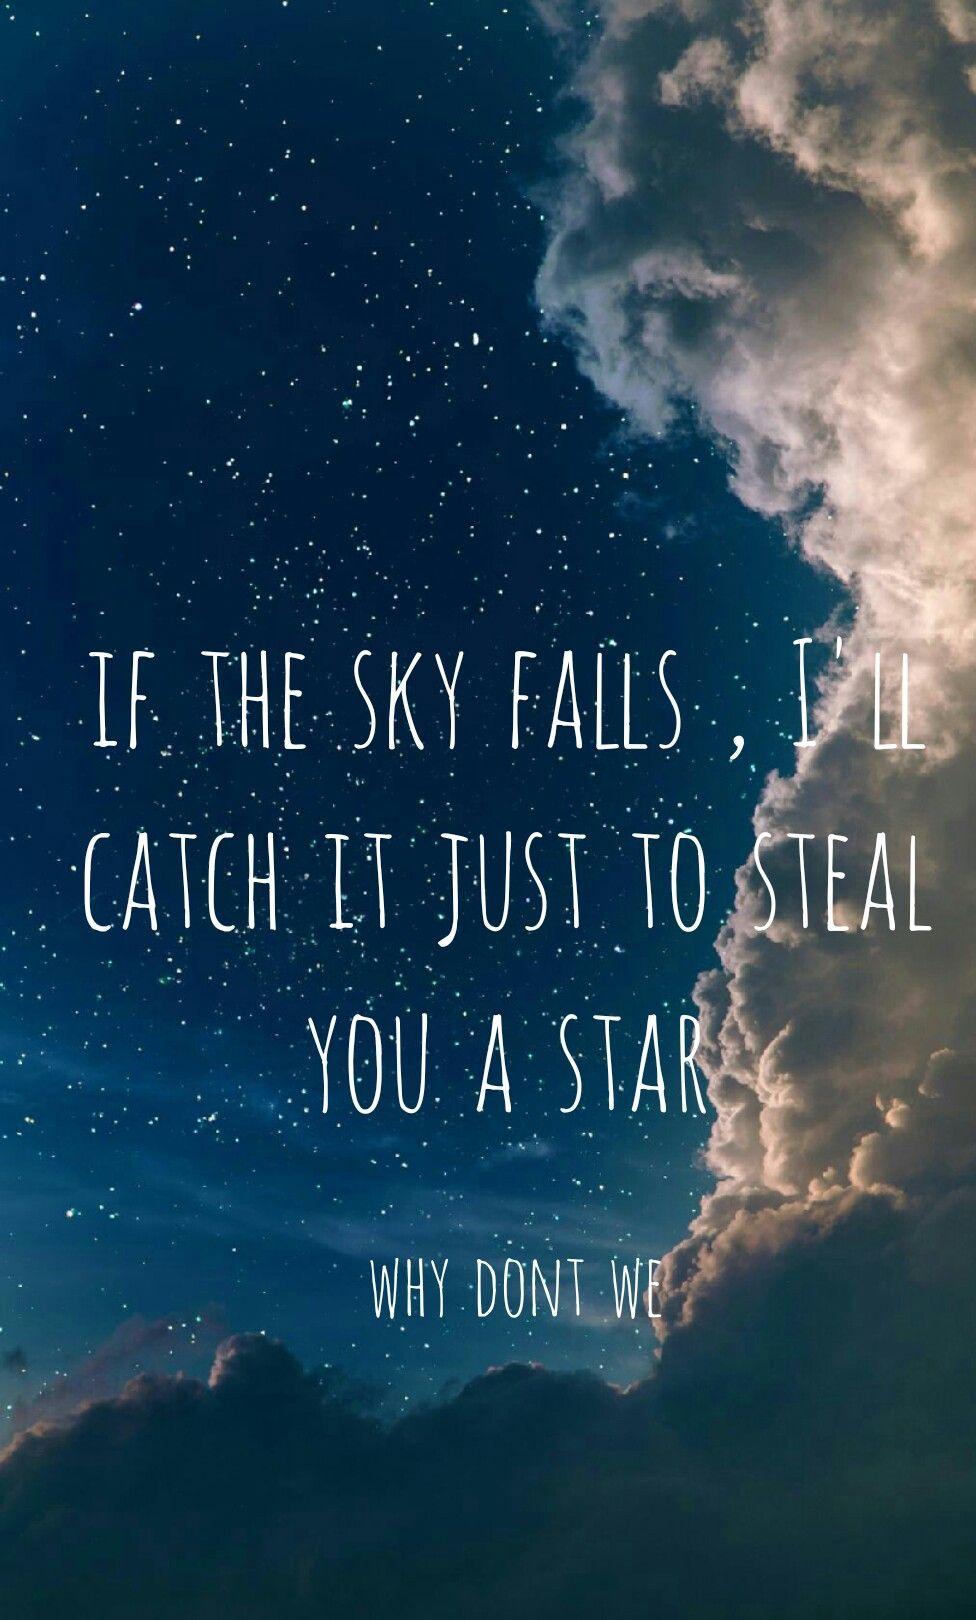 Why dont we Wallpaper Samsung wallpaper Lyrics from why dont we